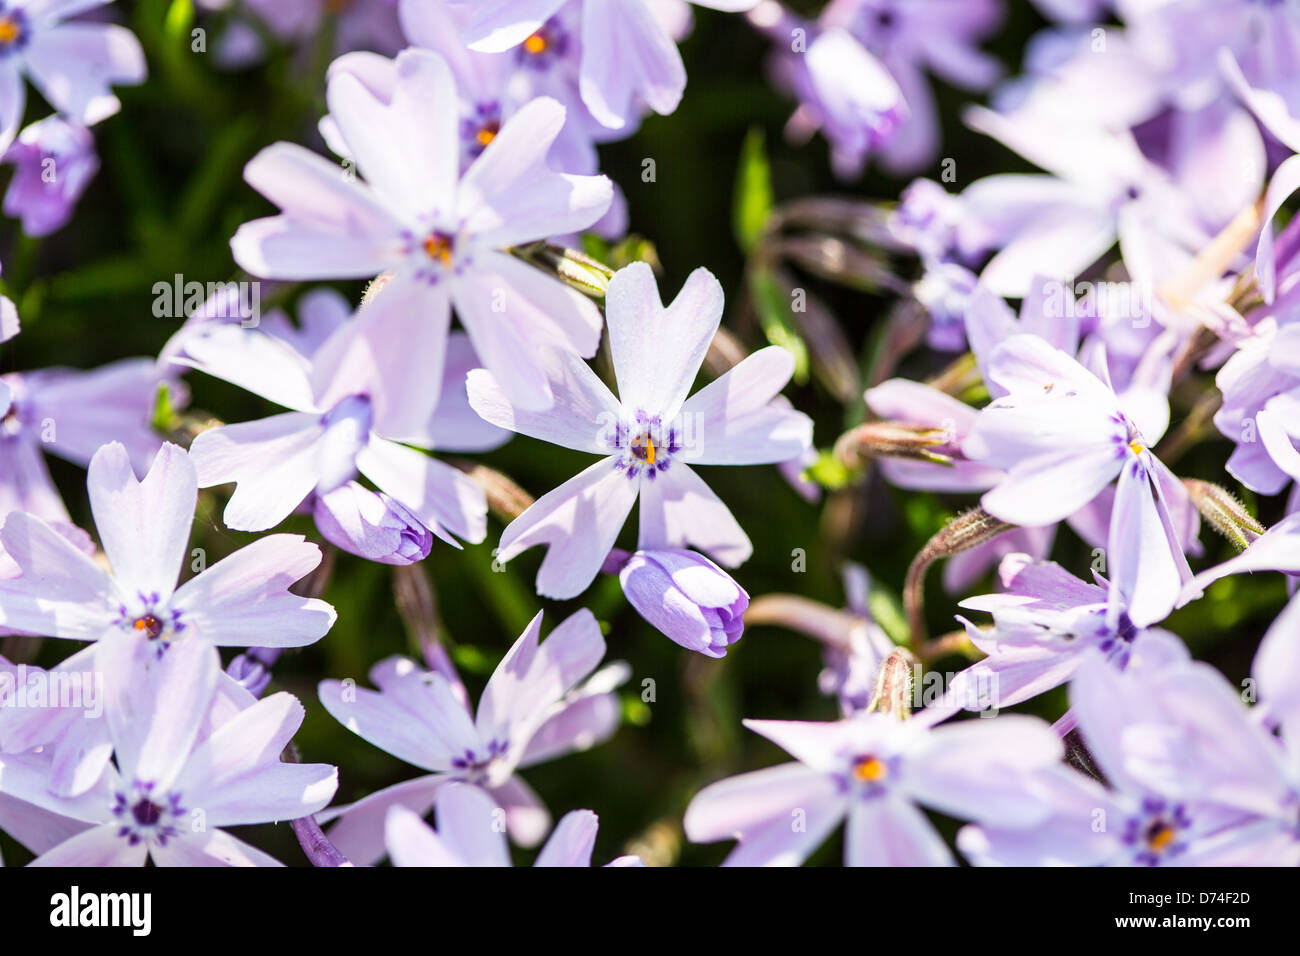 A close up shot of a patch of purple phlox marks the start of spring in the Carolinas. Stock Photo